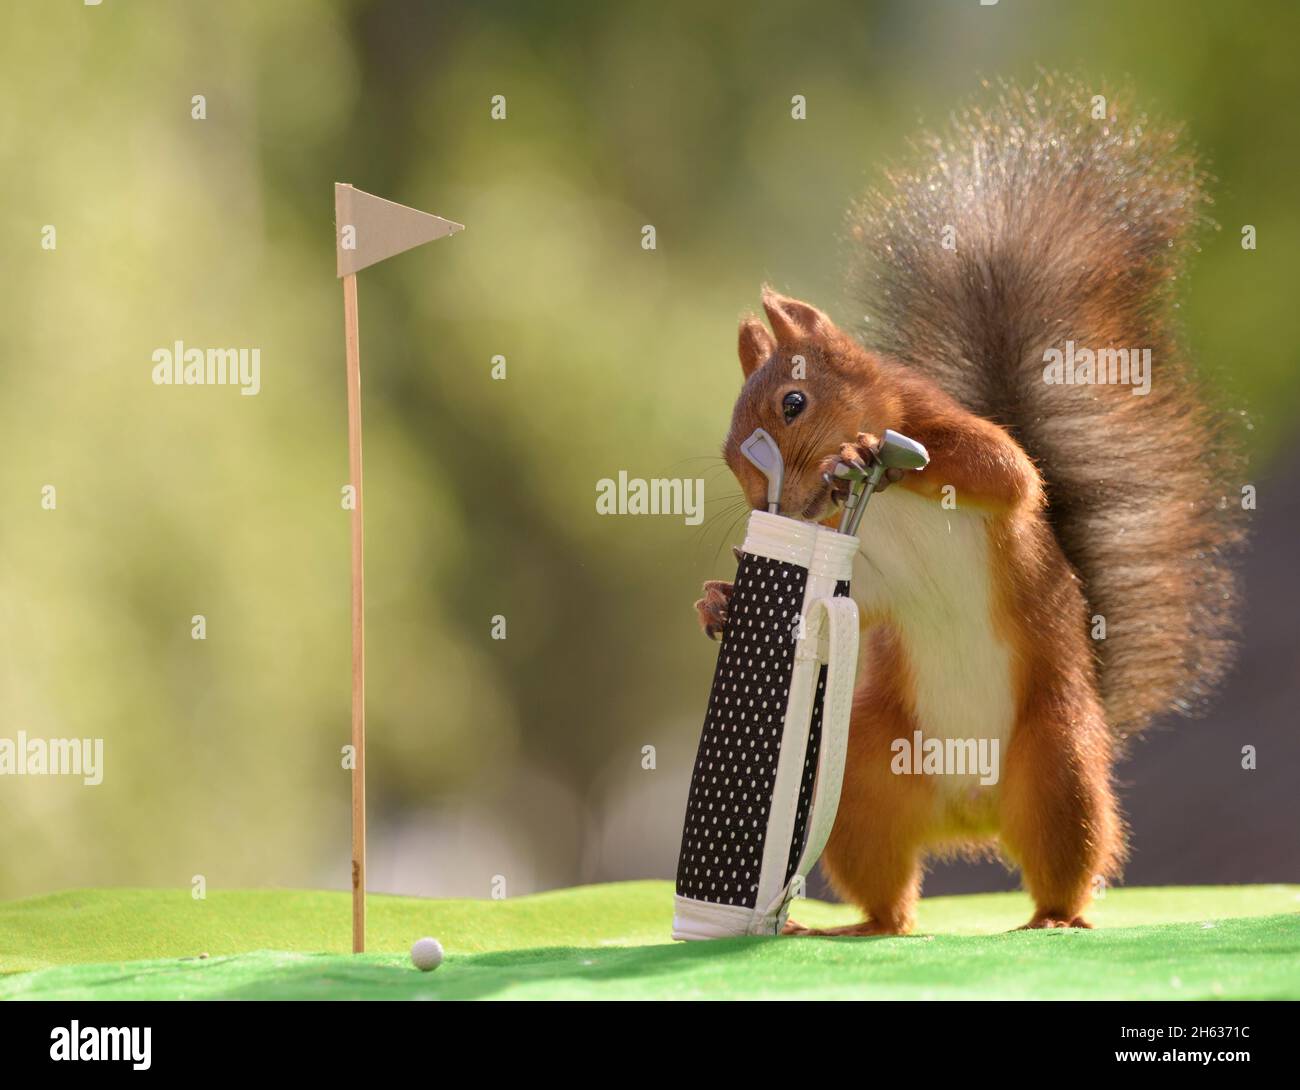 red squirrel taking out golf clubs from a golf bag Stock Photo